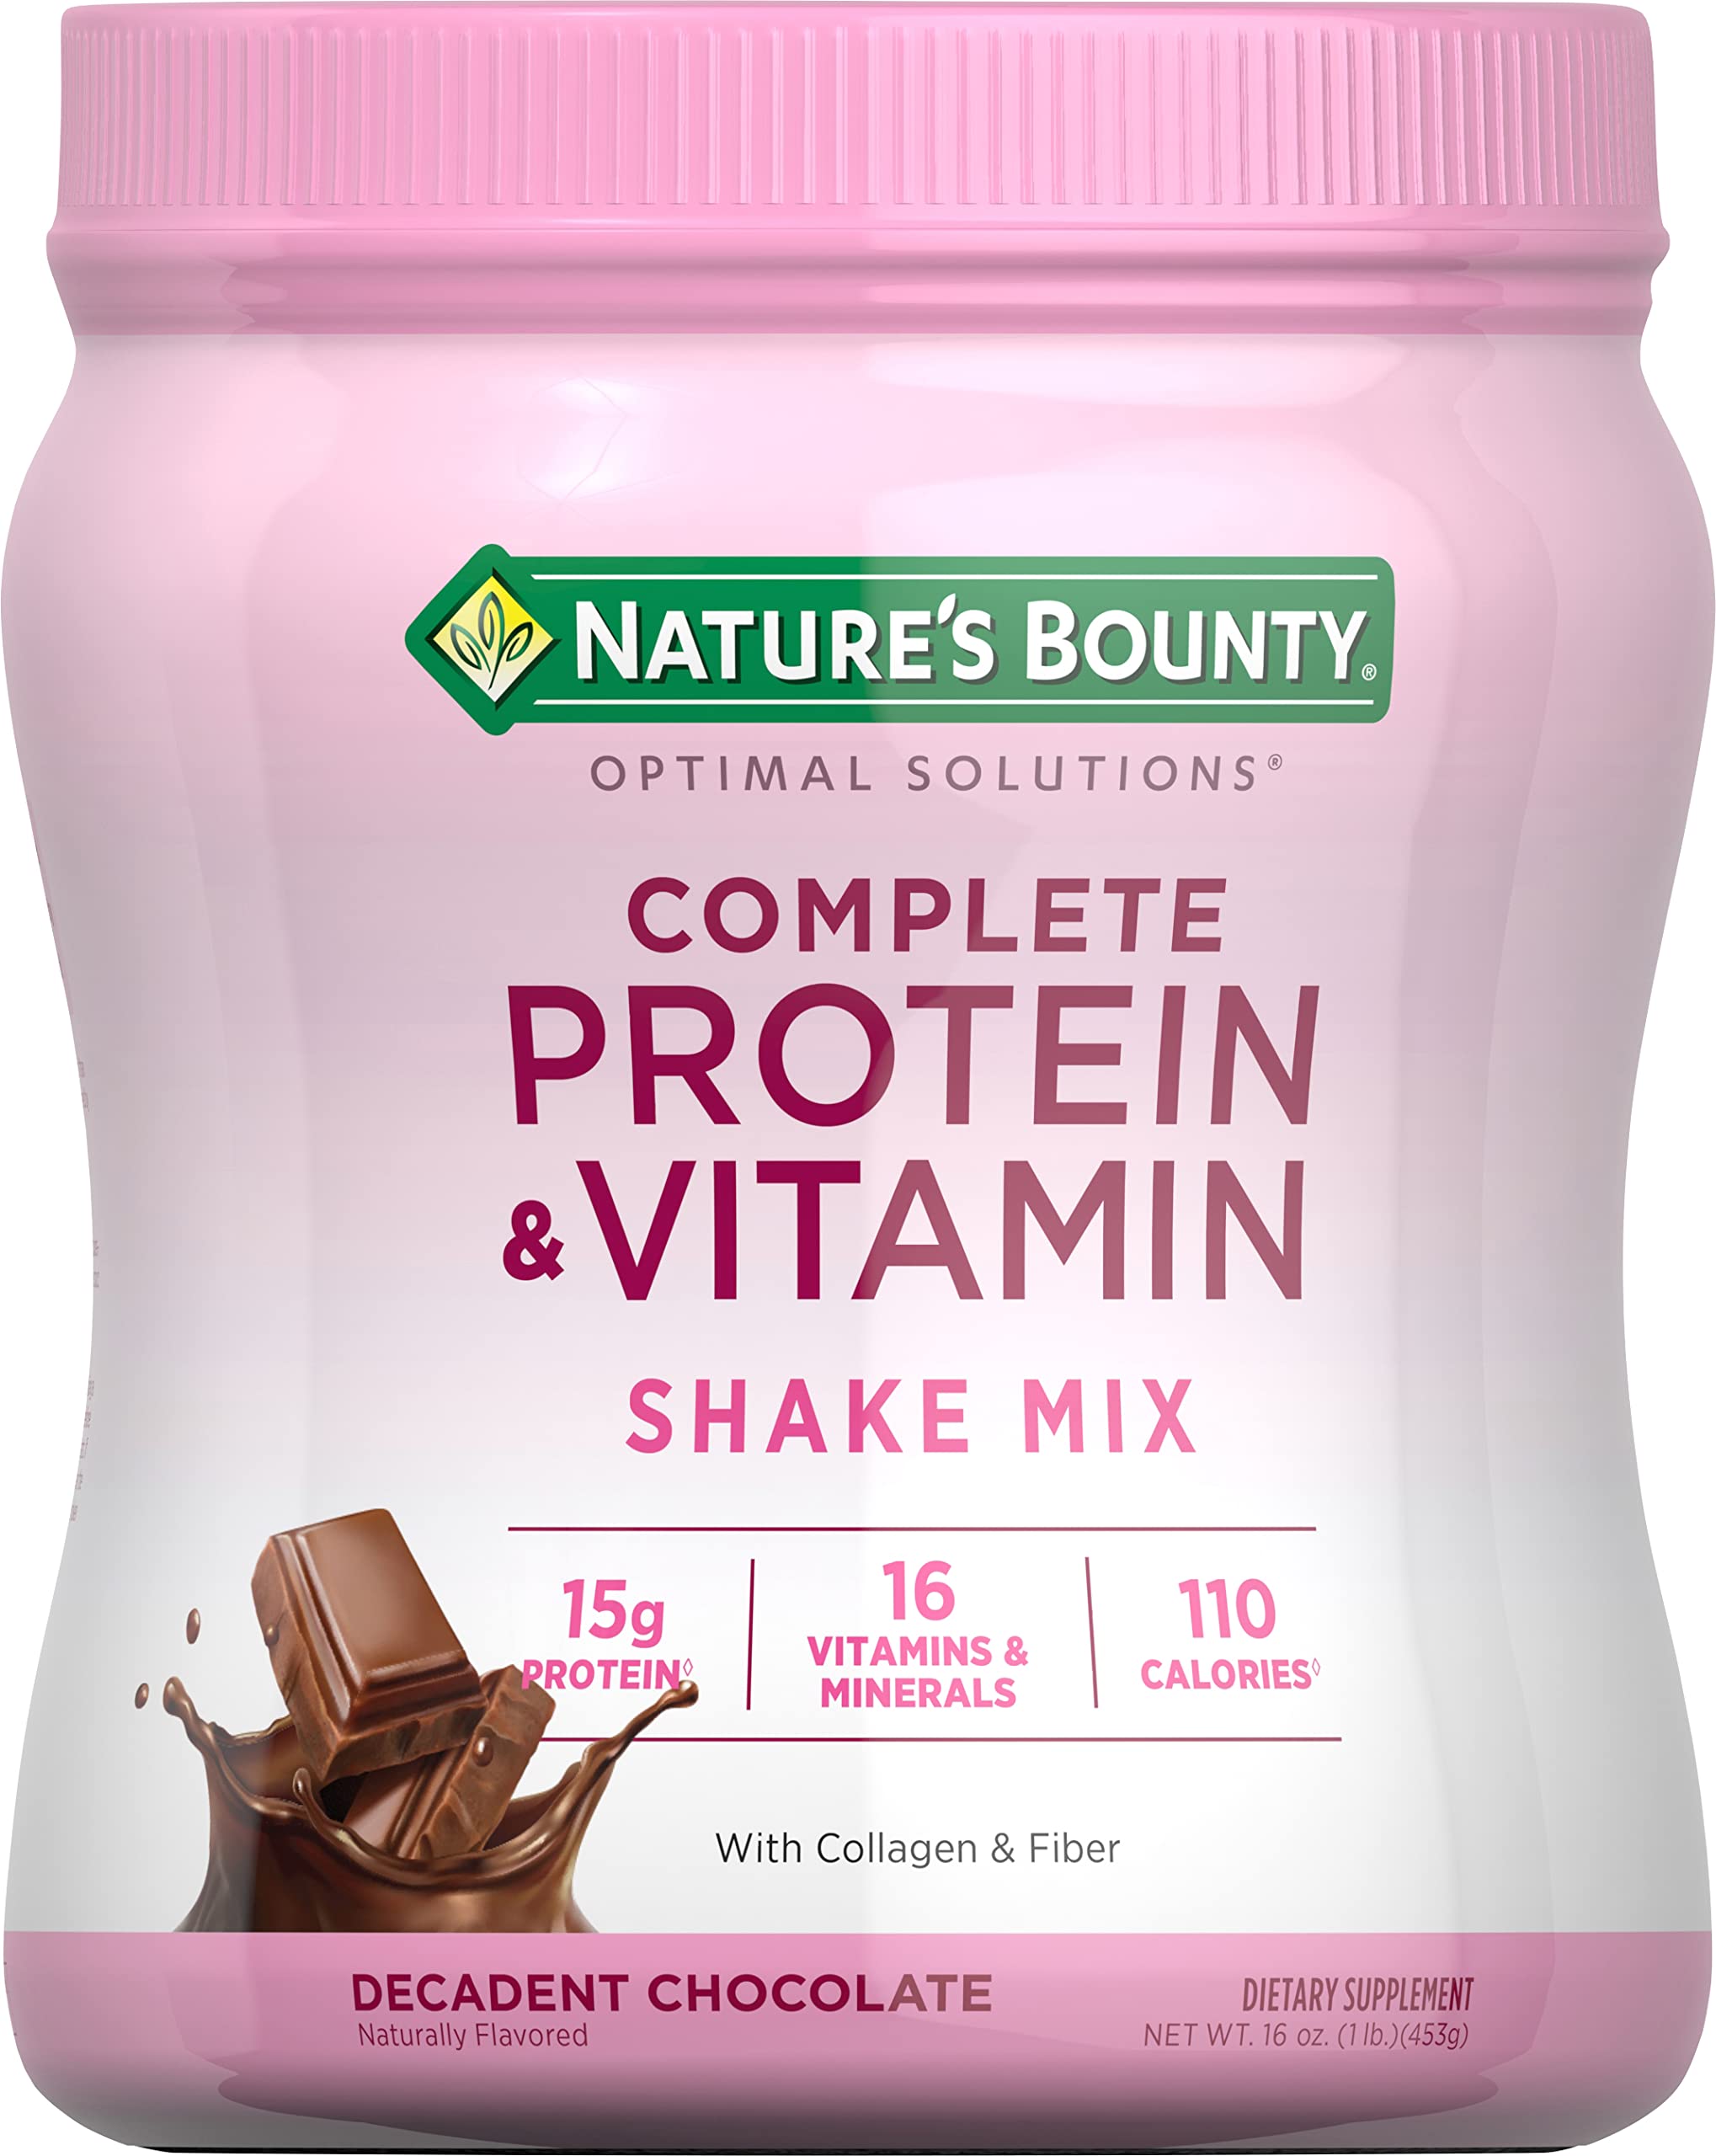 2-Count 1-Lb Nature's Bounty Complete Protein & Vitamin Shake Mix w/ Collagen & Fiber (Decadent Chocolate) $12.64 ($6.32 each) w/ S&S + Free Shipping w/ Prime or on $35+